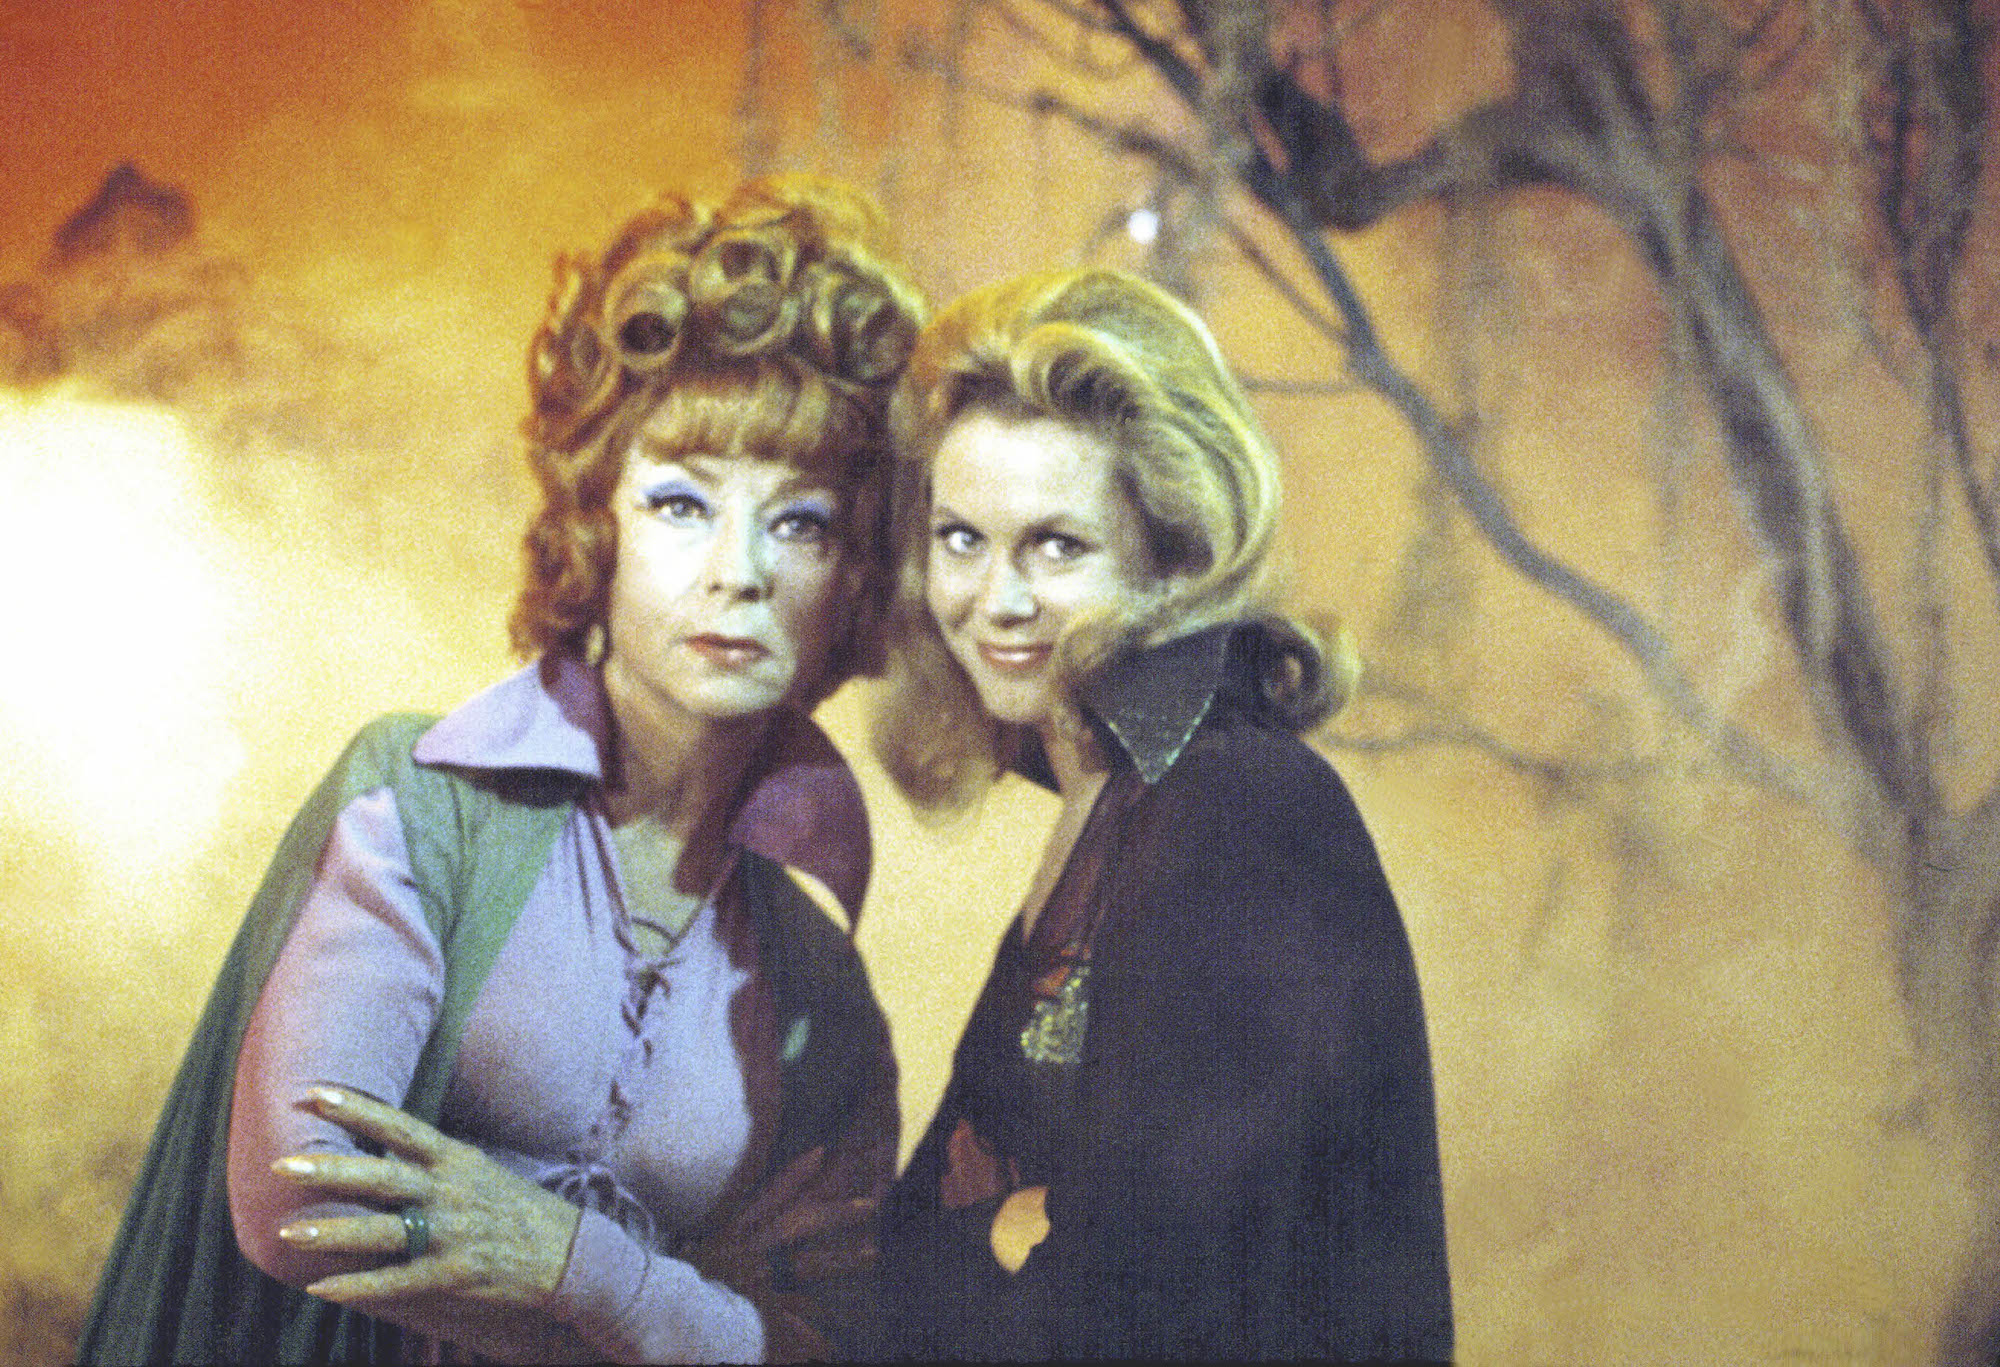 (L-R) Agnes Moorehead as Endora and Elizabeth Montgomery as Samantha Stephens smiling, wearing capes, in front of an orange-lit forest